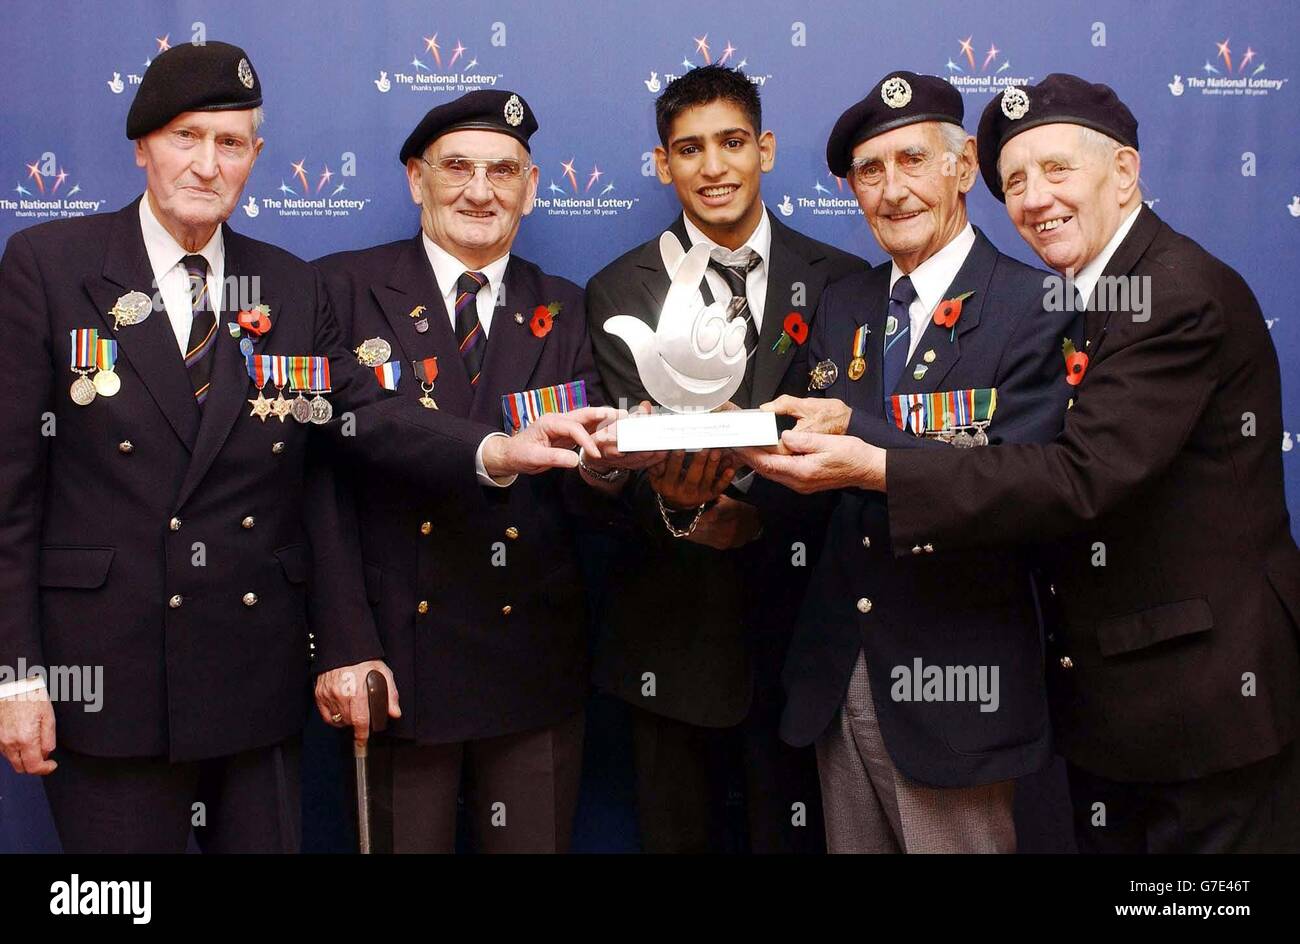 Olympic boxing silver medalist Amir Khan with (left-right) Ray Viney, Ron Jones, Laurie Symes and Bernard Poole with their National Lottery Helping Hands National Hero Award, during their 10th Birthday celebrations, at the Tate Modern in central London. Stock Photo